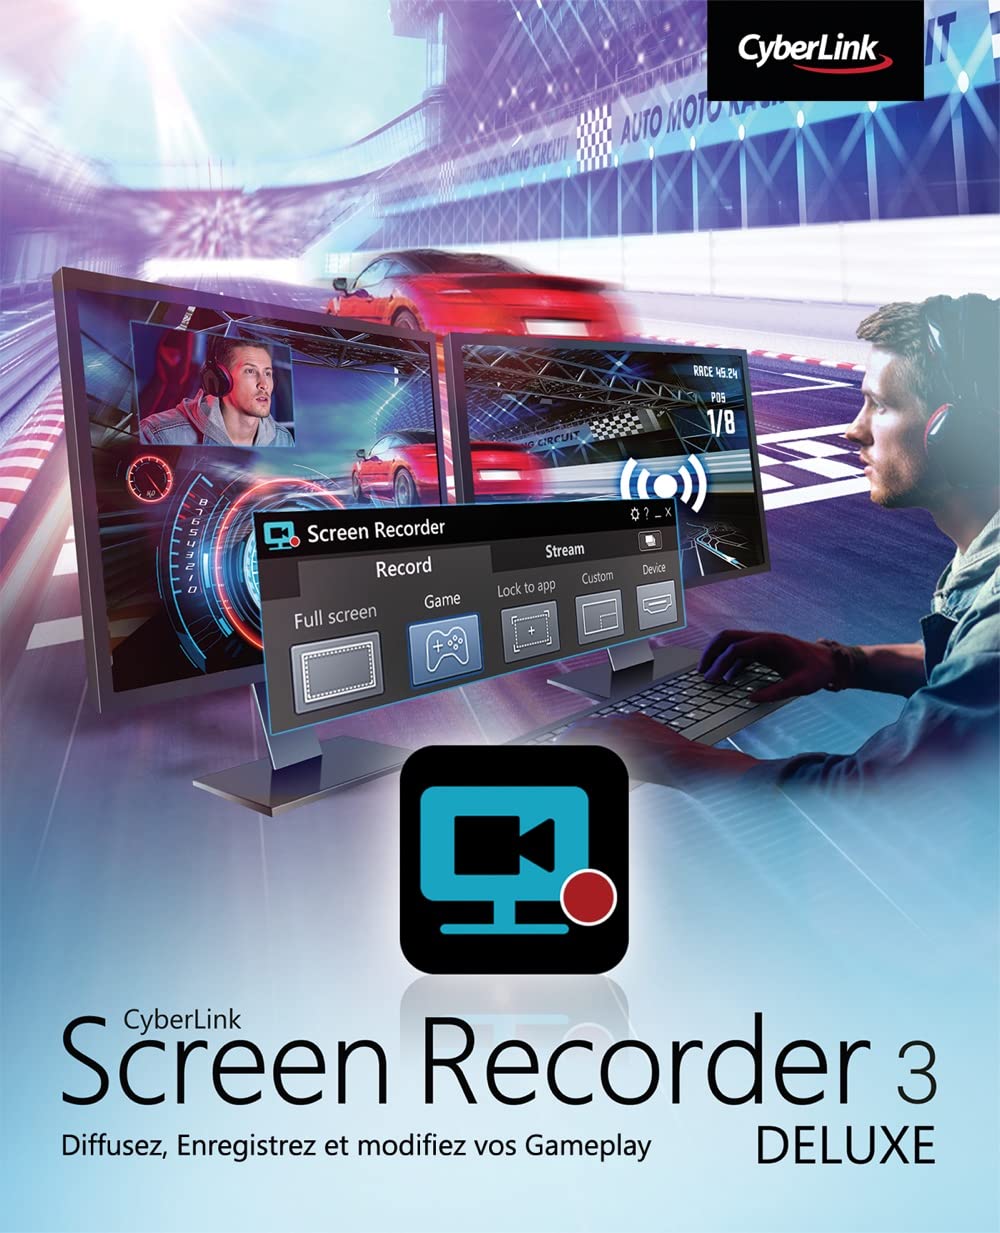 CyberLink Screen Recorder Deluxe 4.3.1.27955 instal the new version for iphone